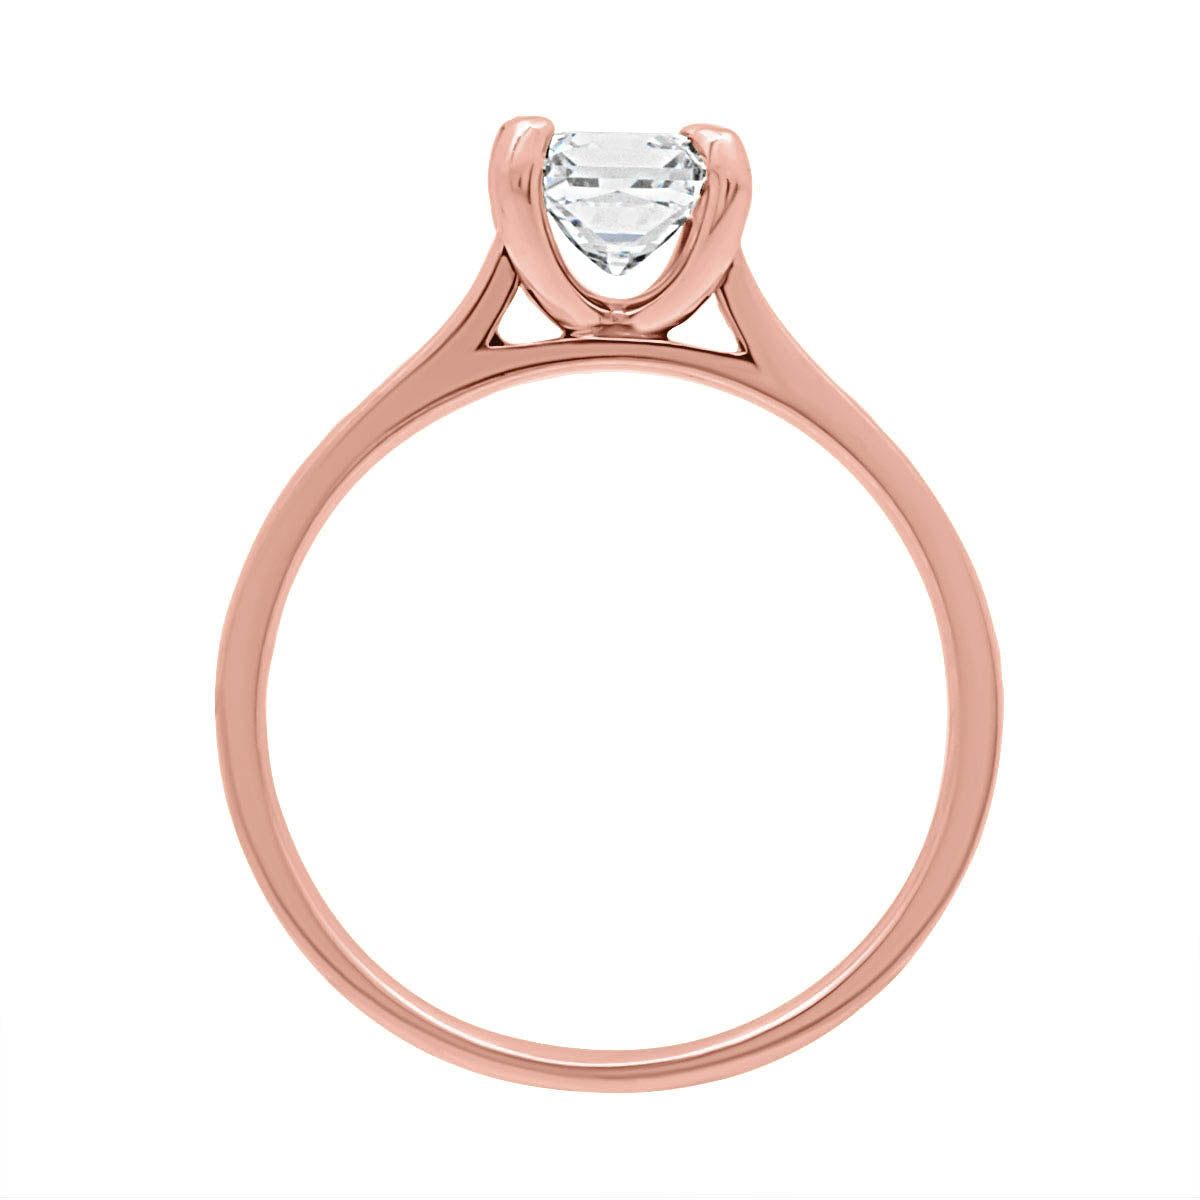 Princess cut engagement ring in rose gold in an upright position